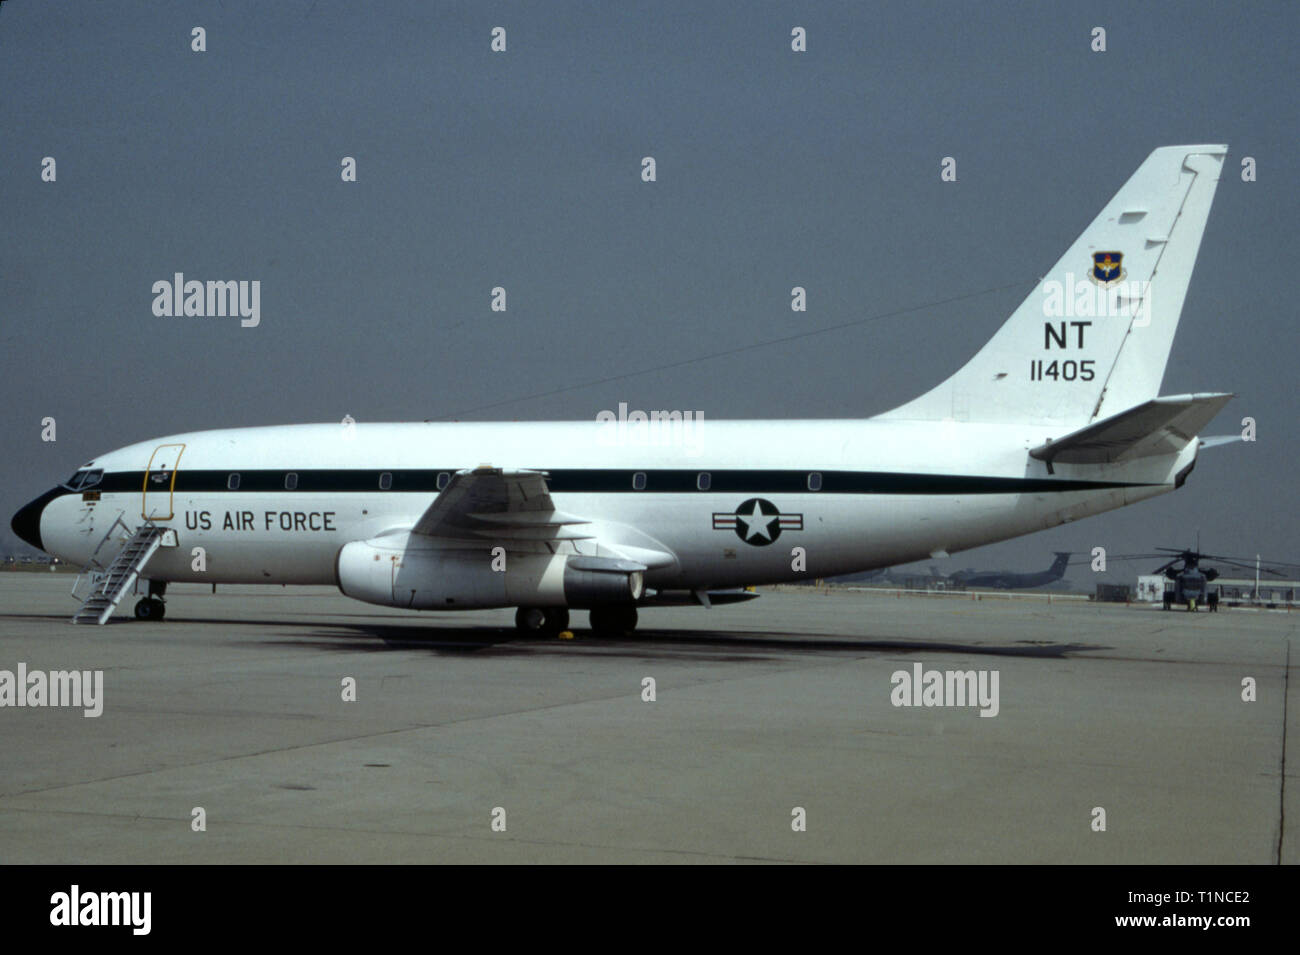 USAF United States Air Force Boeing T-43 11405 Stockfoto